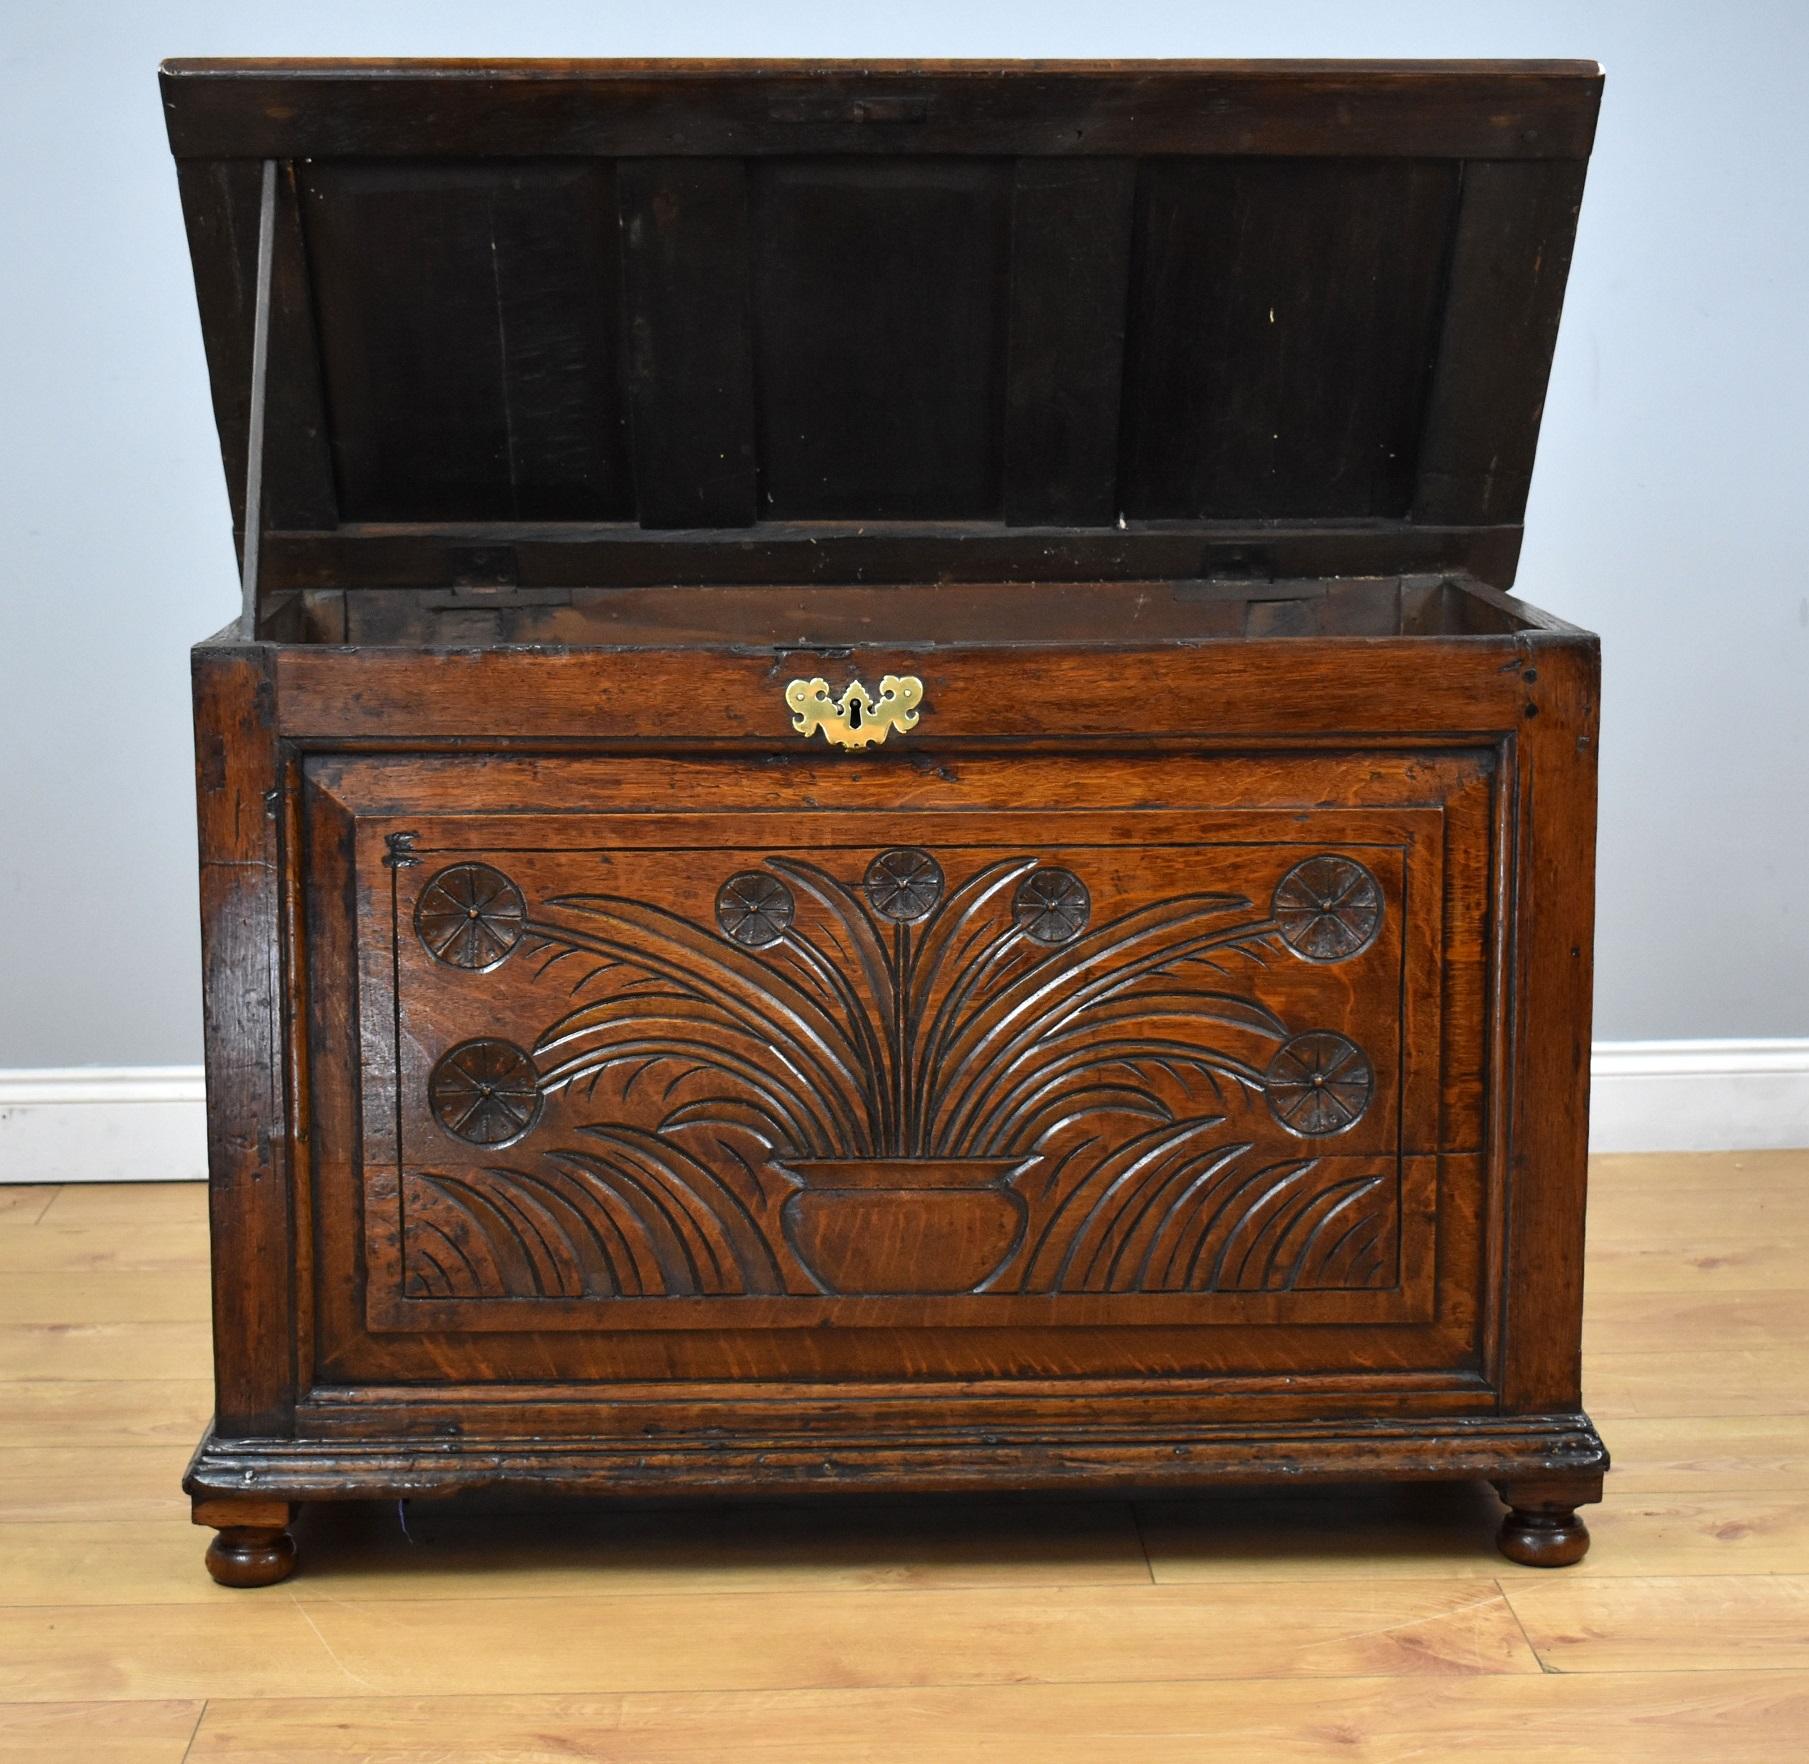 18th century carved Oak blanket chest/coffer in good condition having been recently polished by hand. Detailed carving to the front and stands on bun feet.